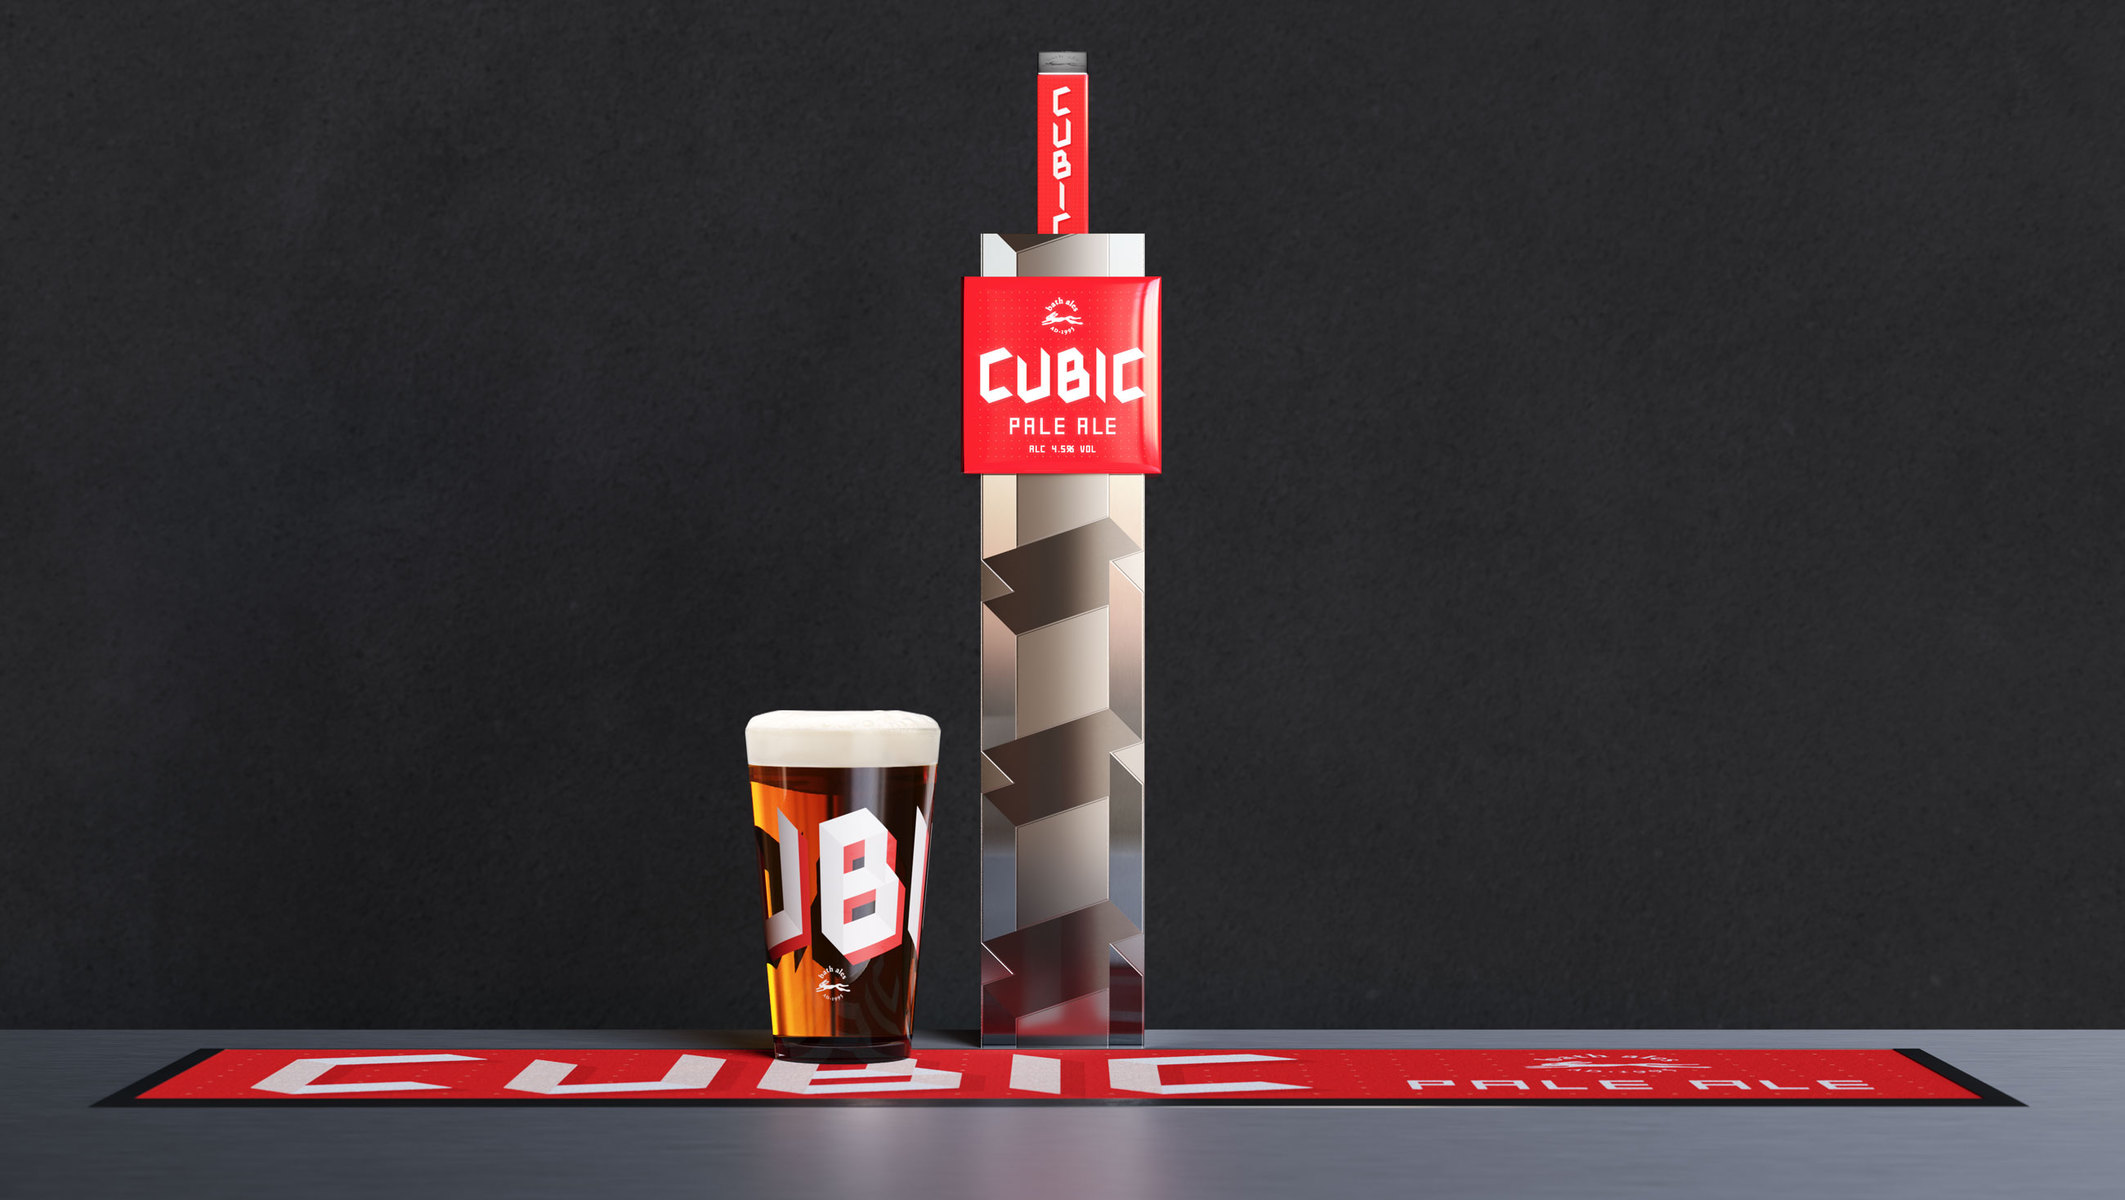 Bath Ales partners with Thirst Craft to create a launch new brand Cubic